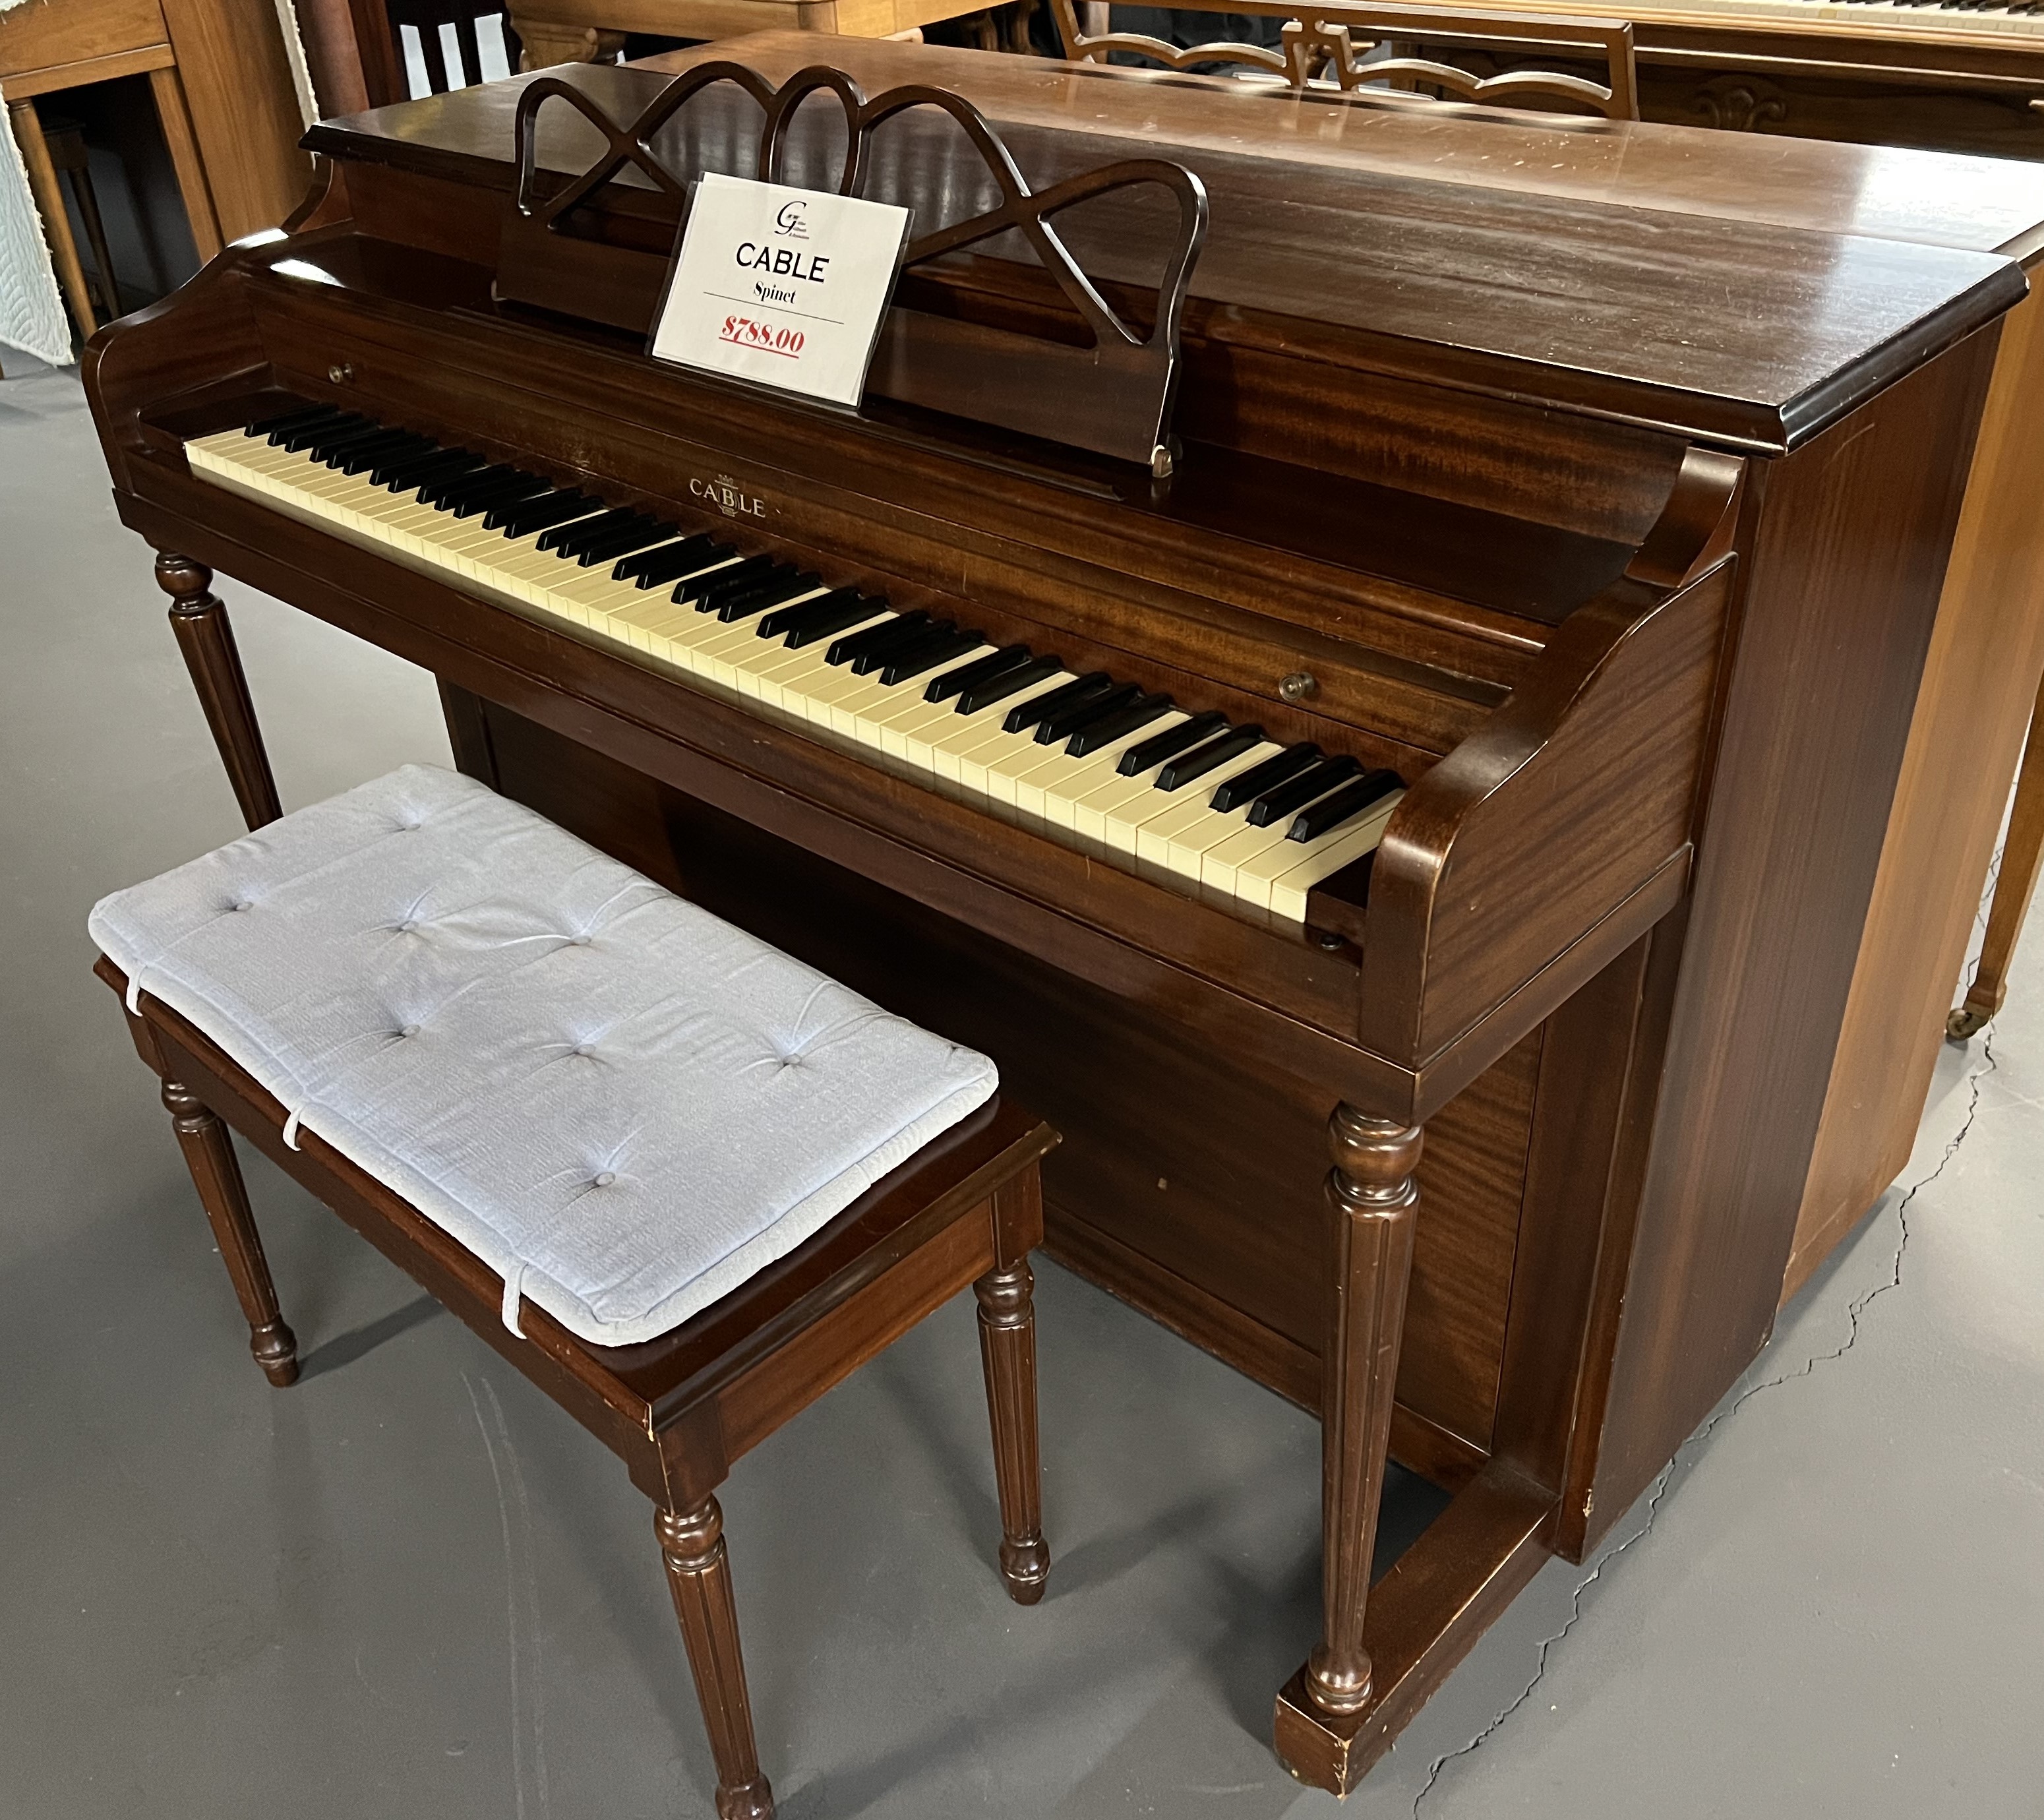 Cable Spinet in mahogany